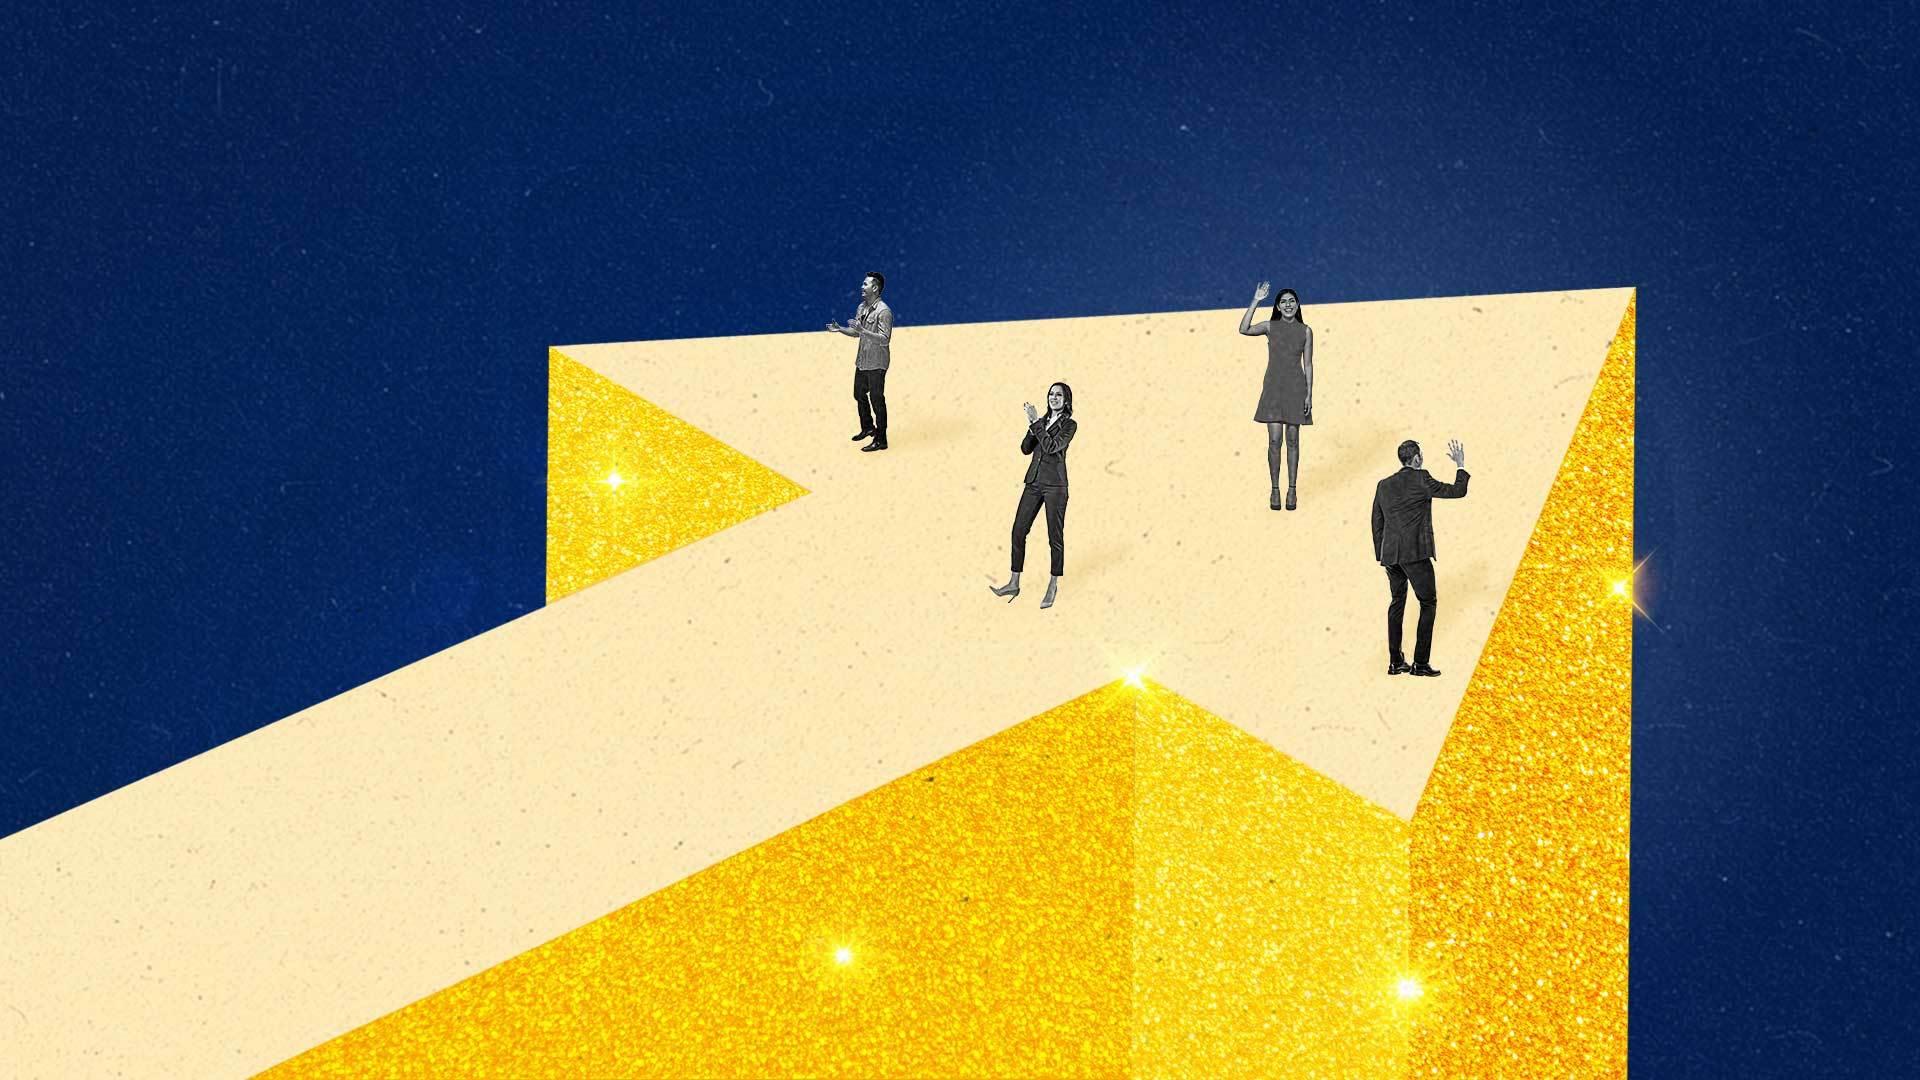 Four business people wave and applaud while standing on a gold, glittery upward arrow.